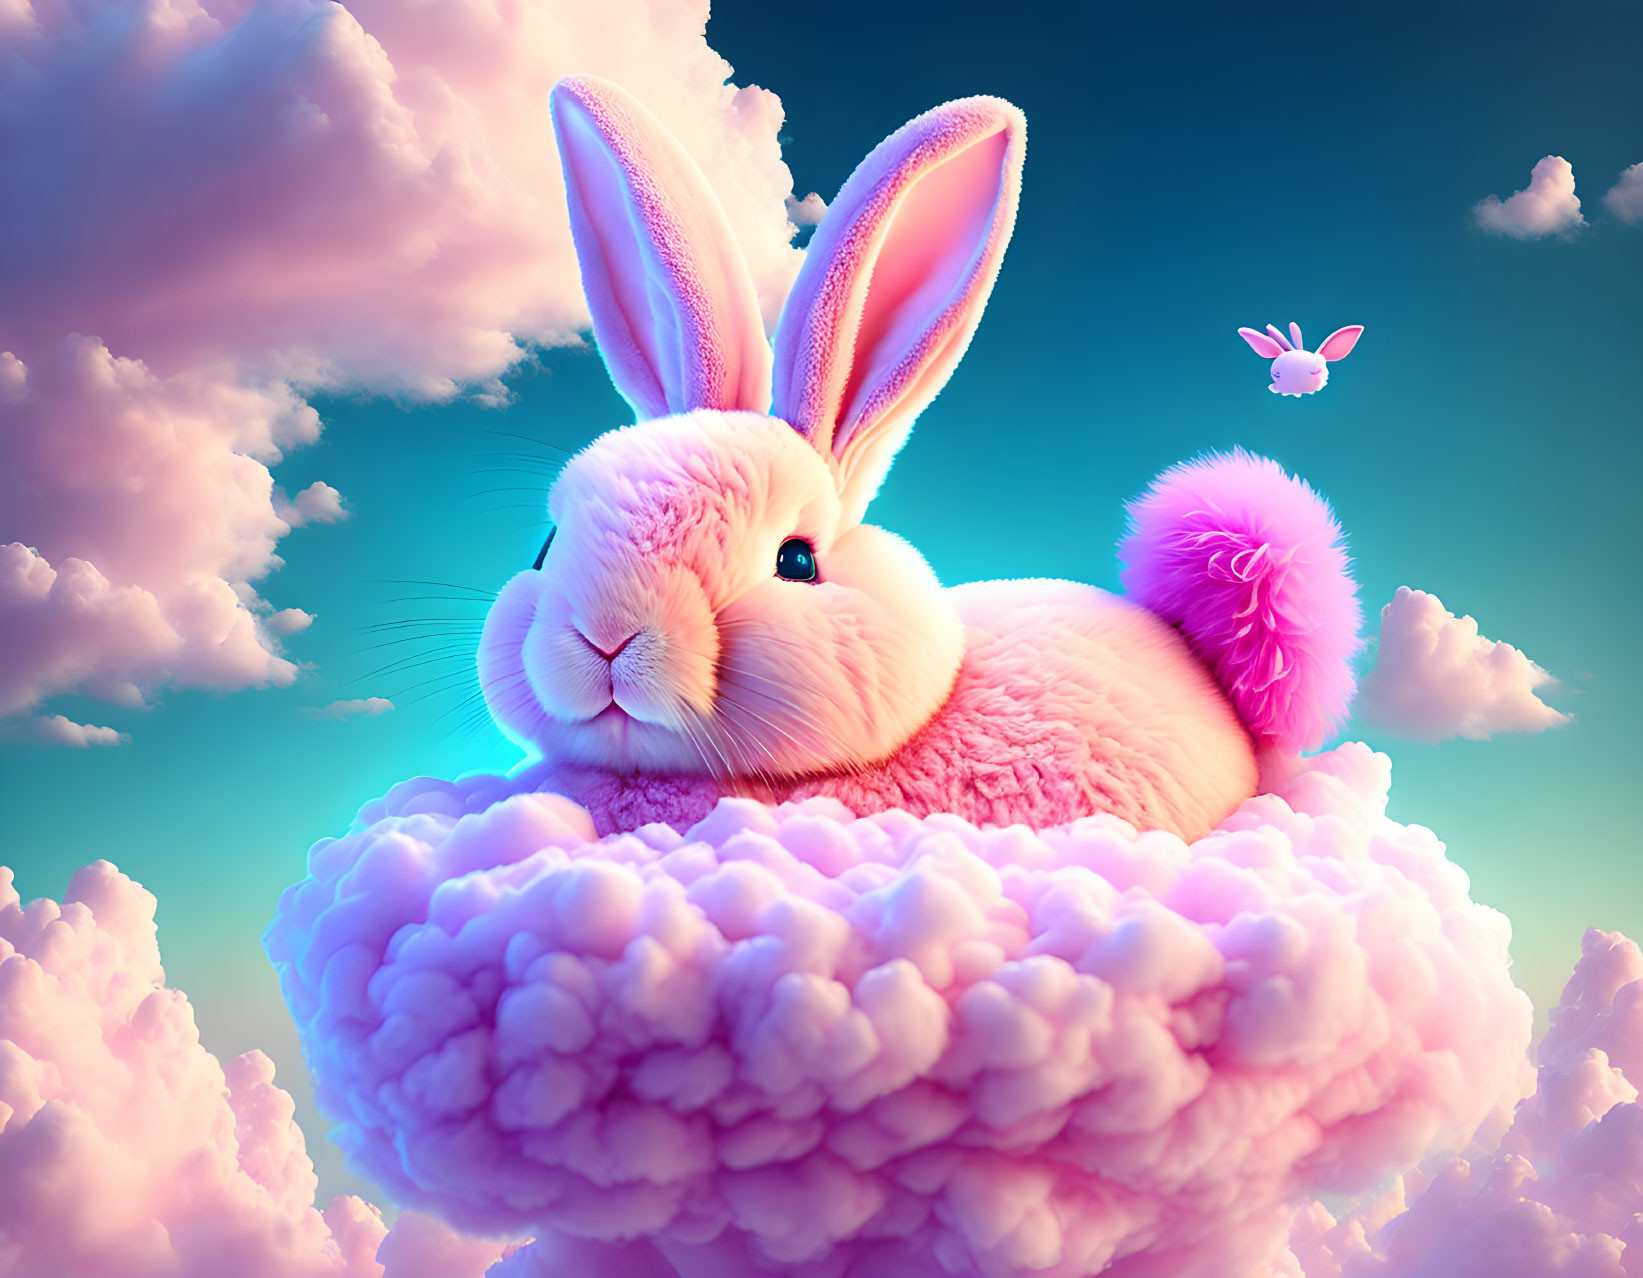 Whimsical pink rabbit on cloud with butterfly in blue sky